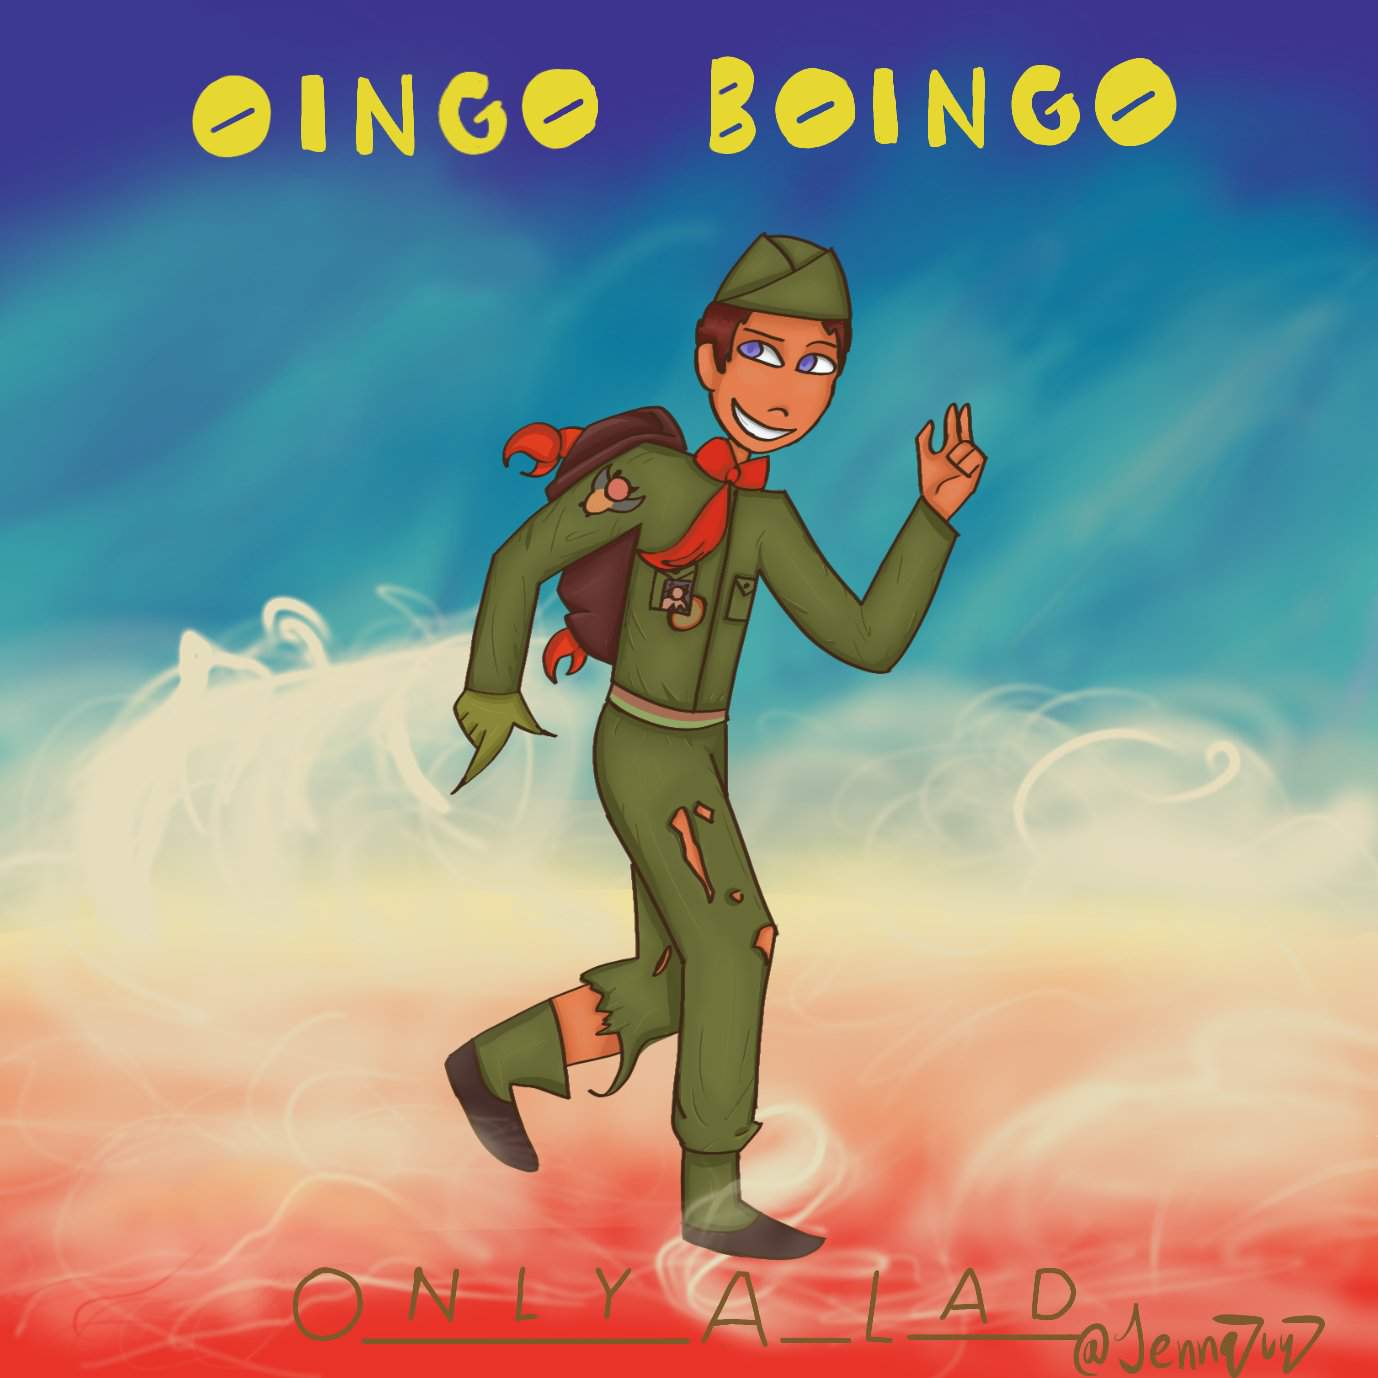 This is a thingy I made of the album cover of only a lad by oingo boingo. 